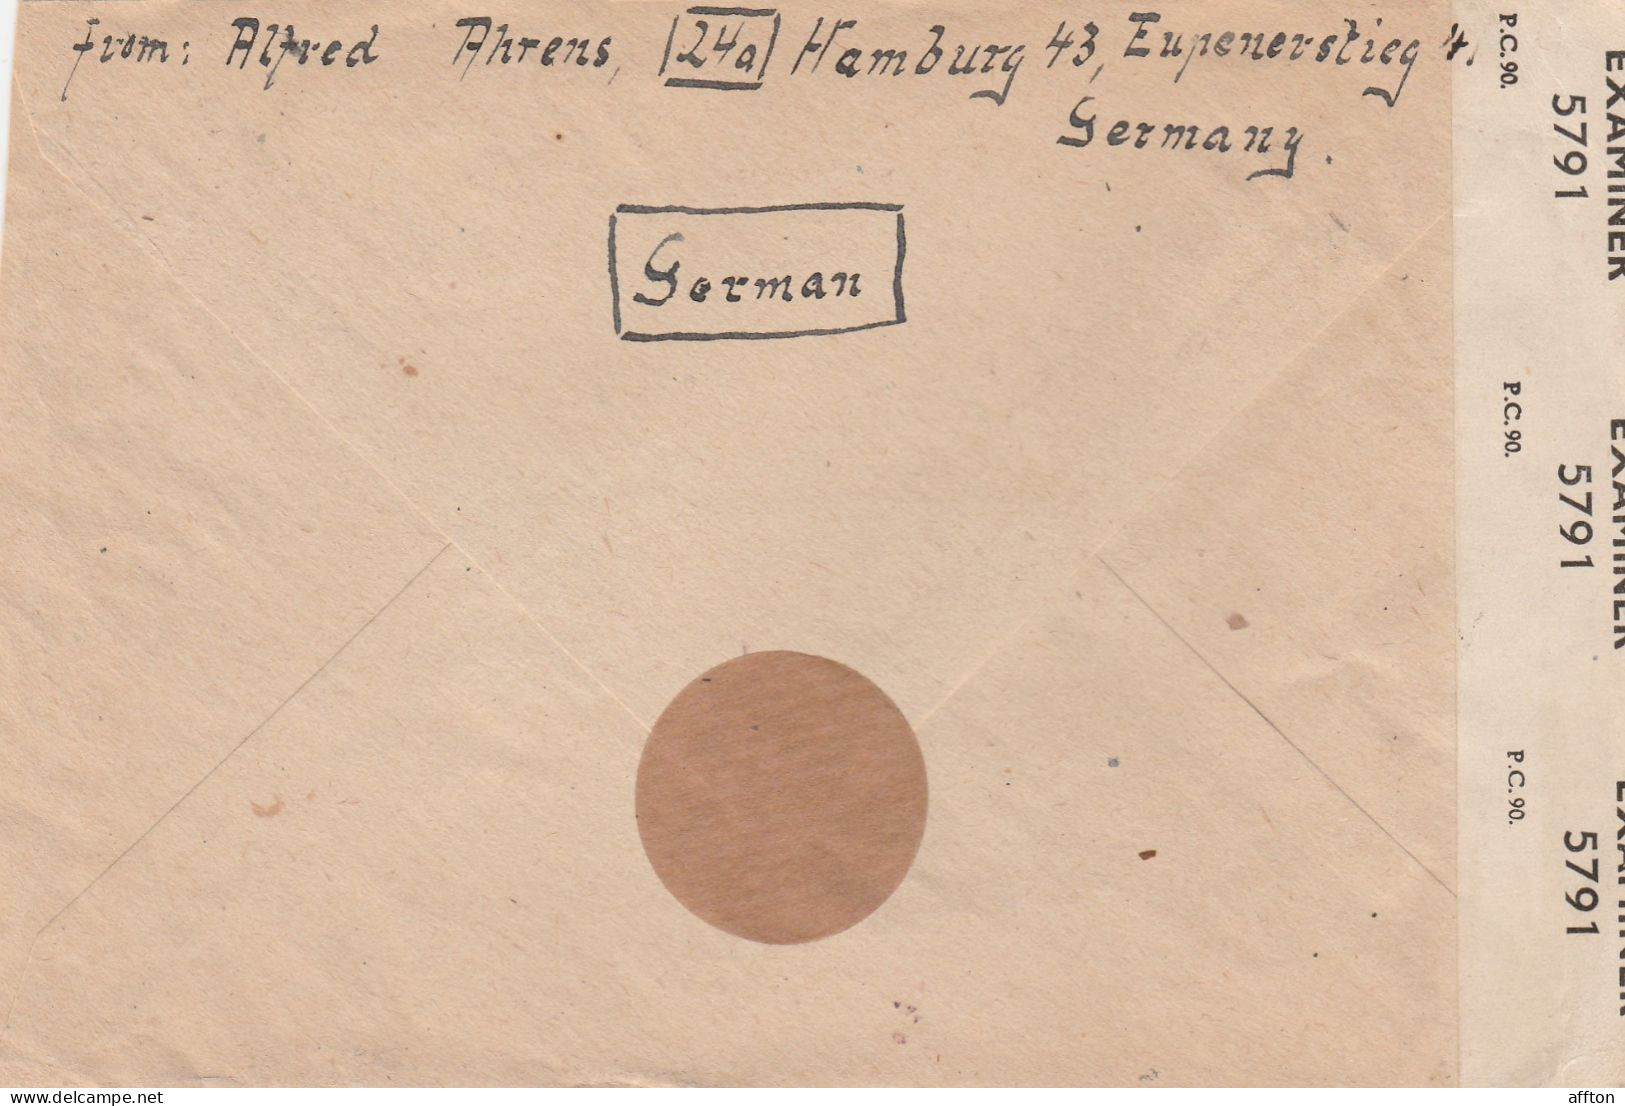 Germany 1947 Censored Cover Mailed To USA - Covers & Documents